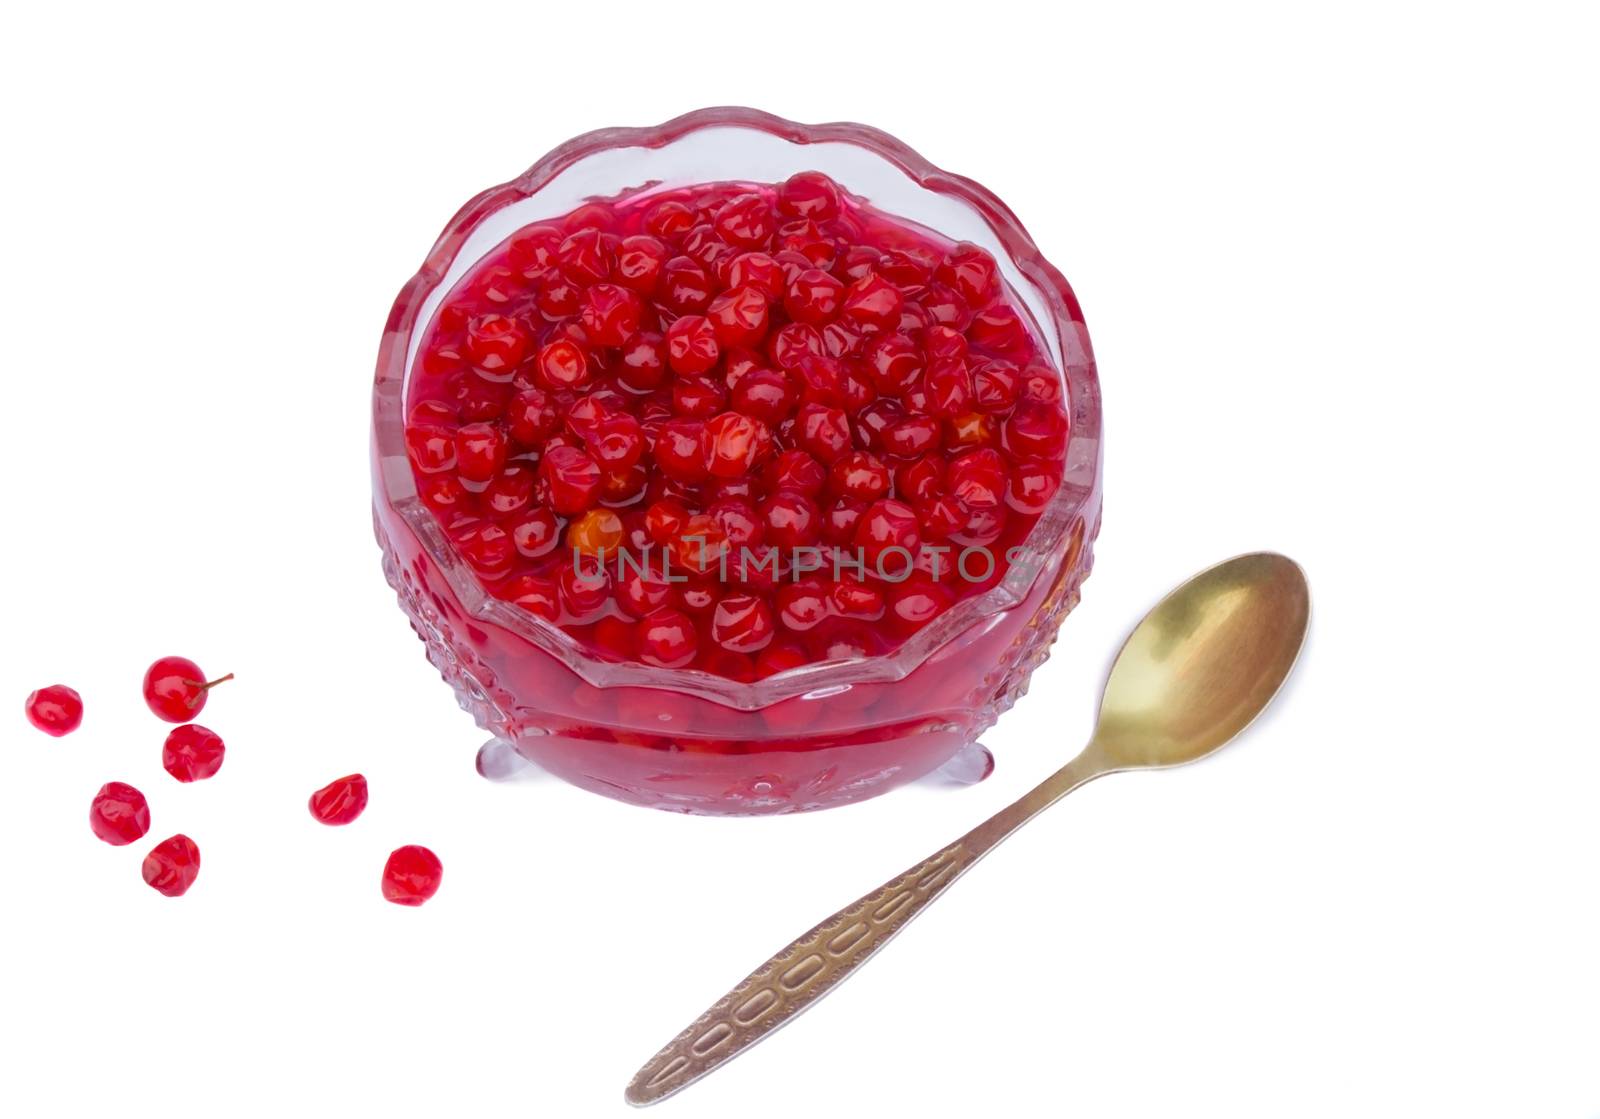 Bright red berries in a crystal vase filled with sugar syrup. Presented on a white background.